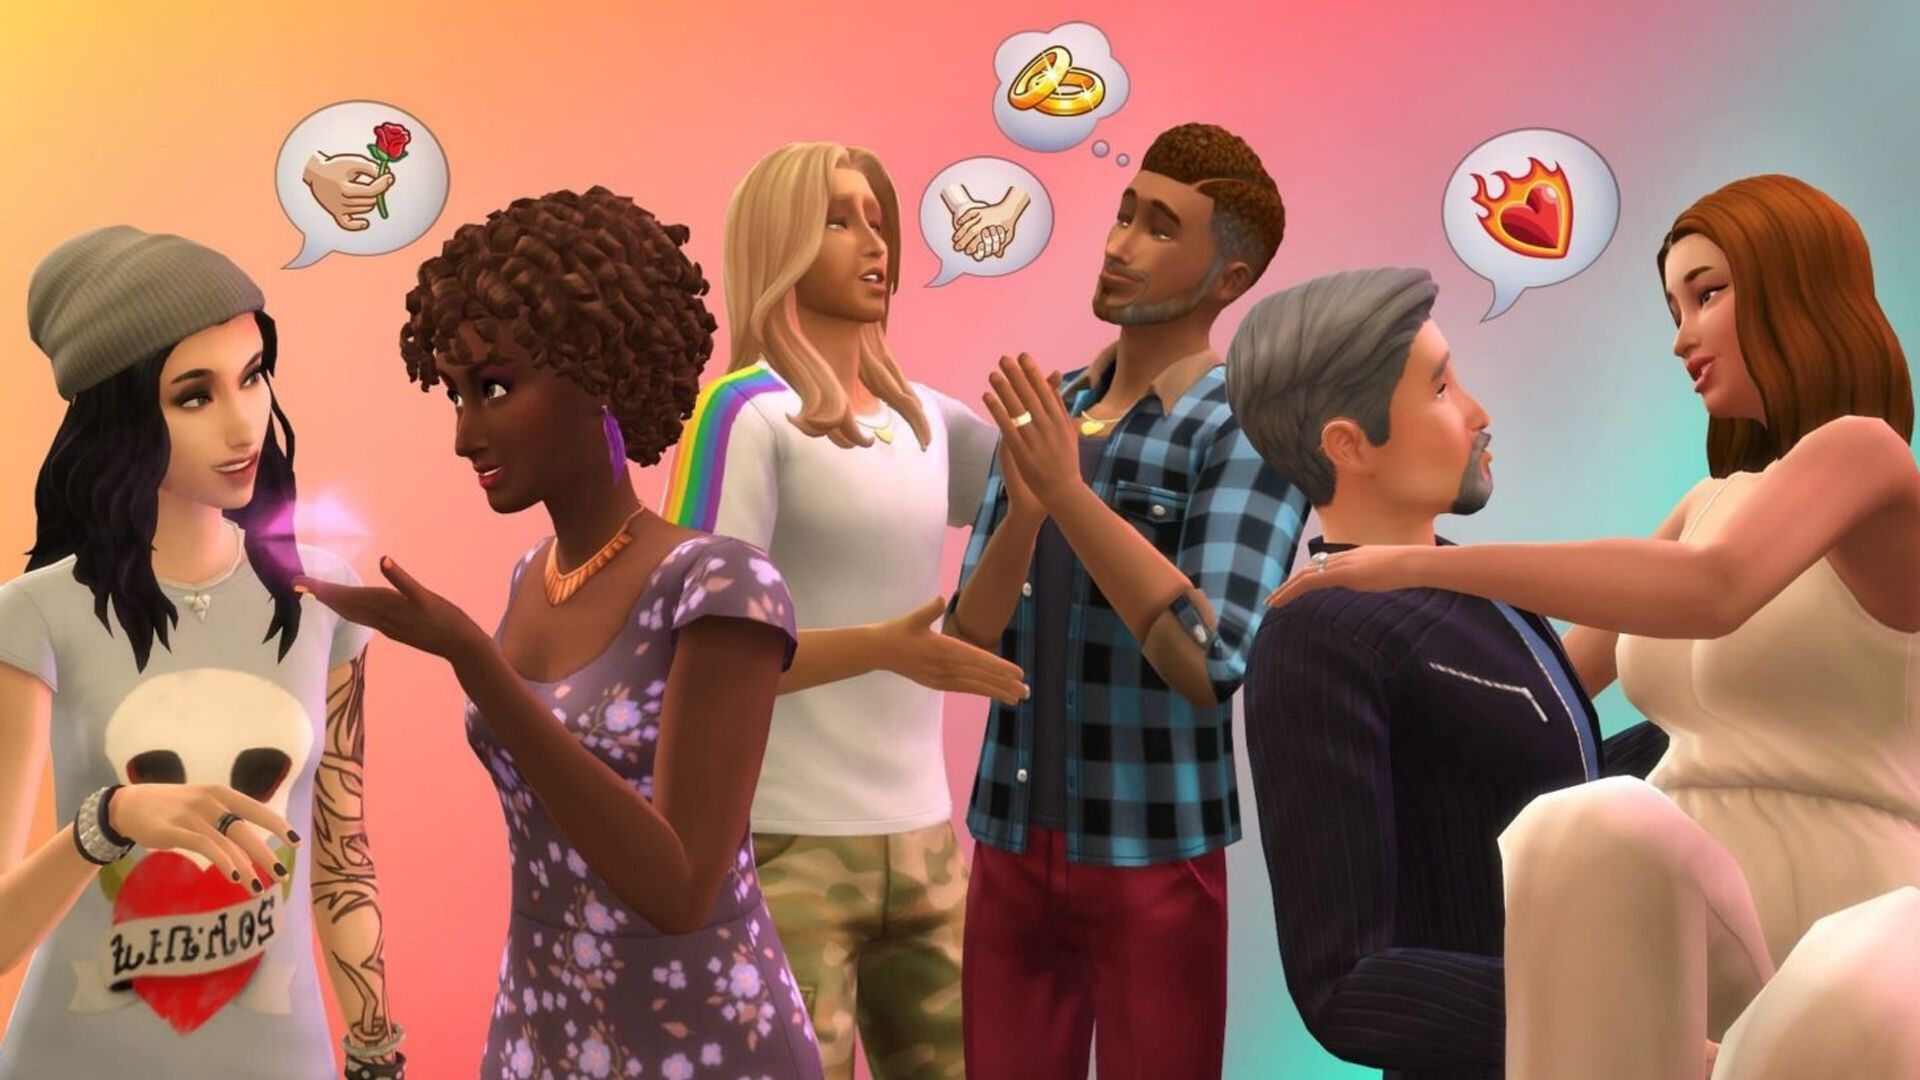 The Sims 4 Mod Hub: How to Download Mods and CC